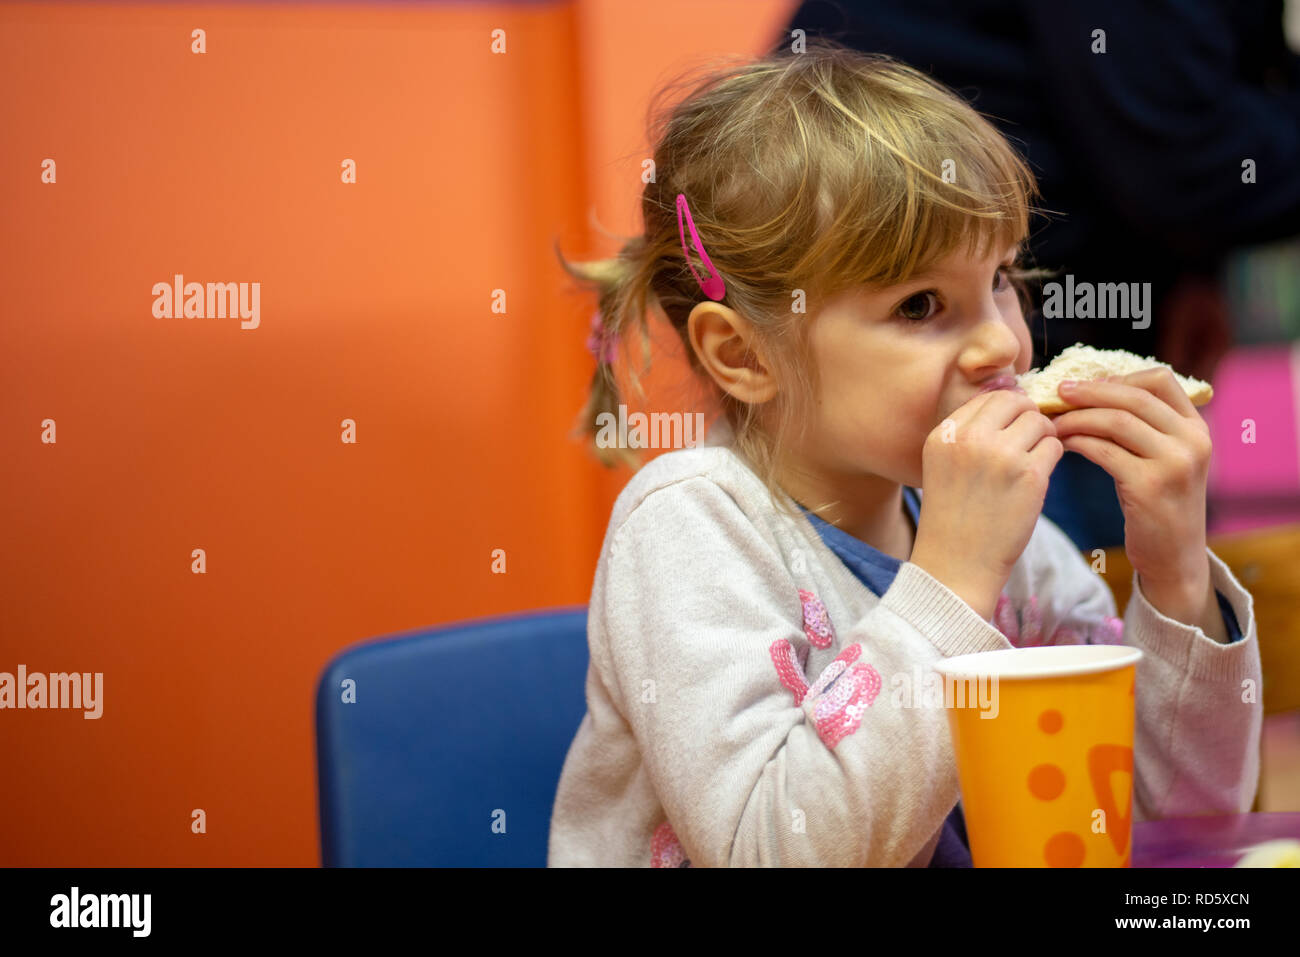 Girl eating sandwich at birthday party Stock Photo